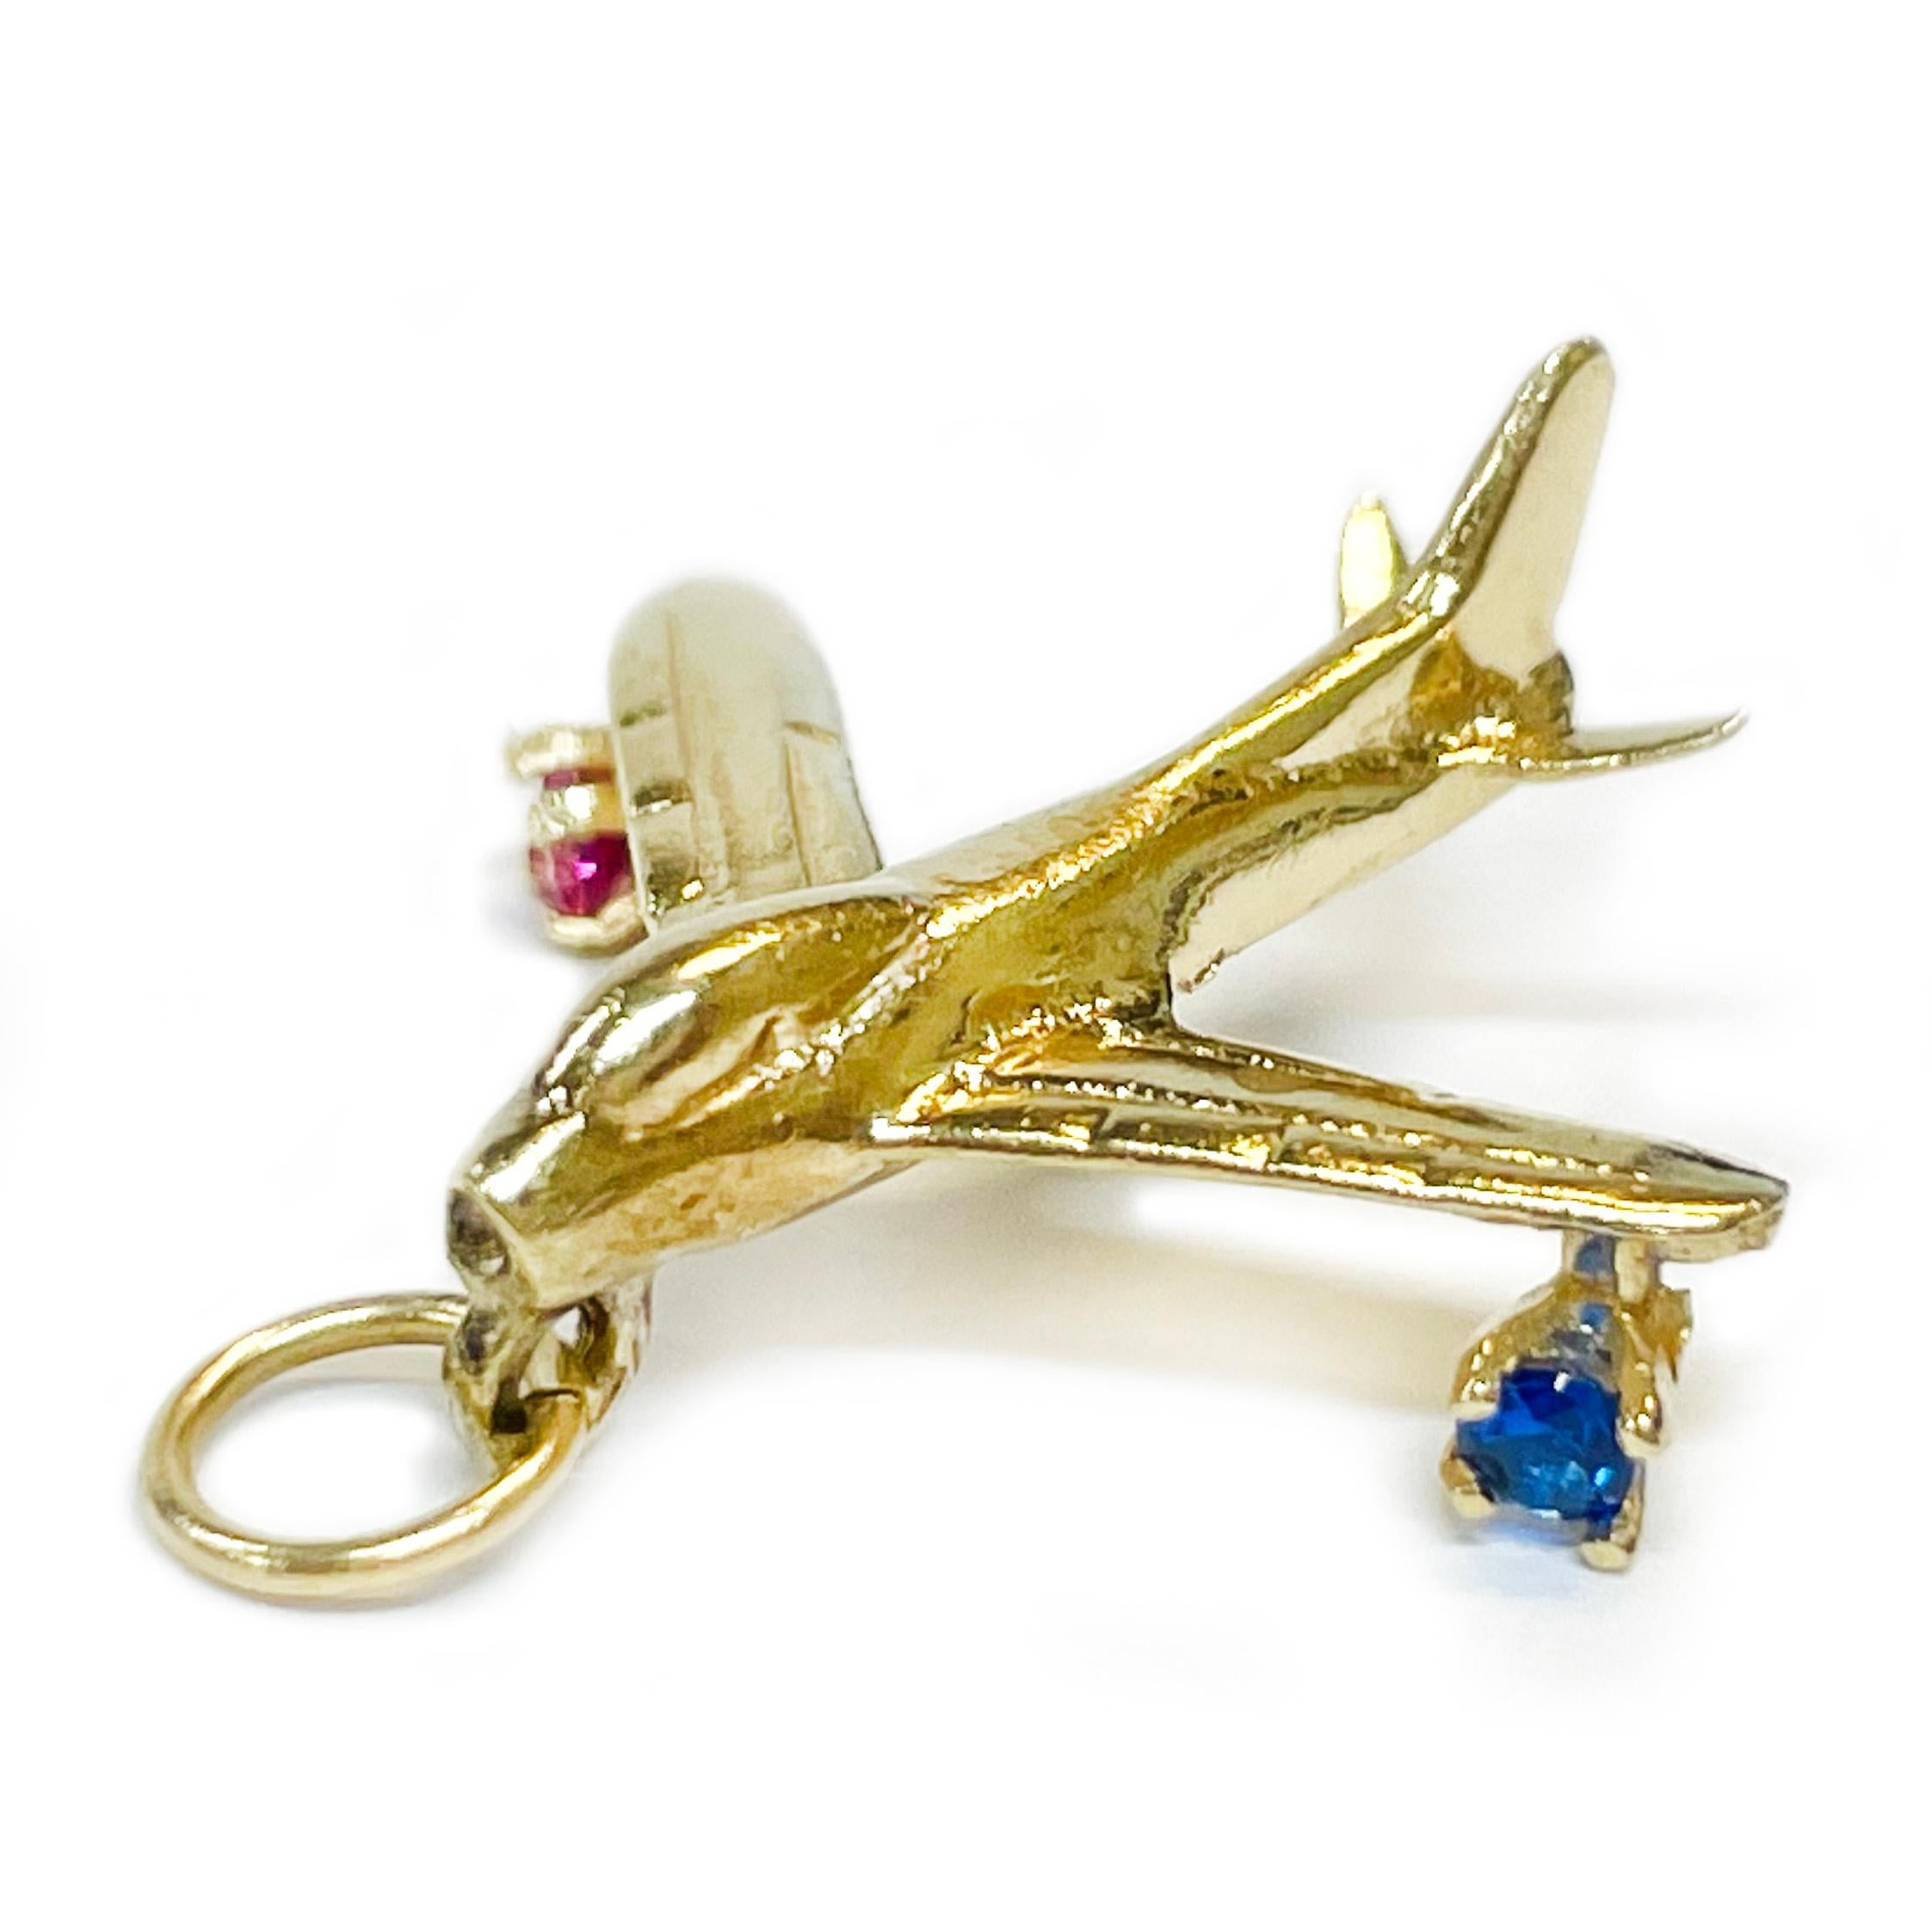 Gold Plated Sterling Silver 747 Jumbo Jet Airplane Charm New Old Stock 